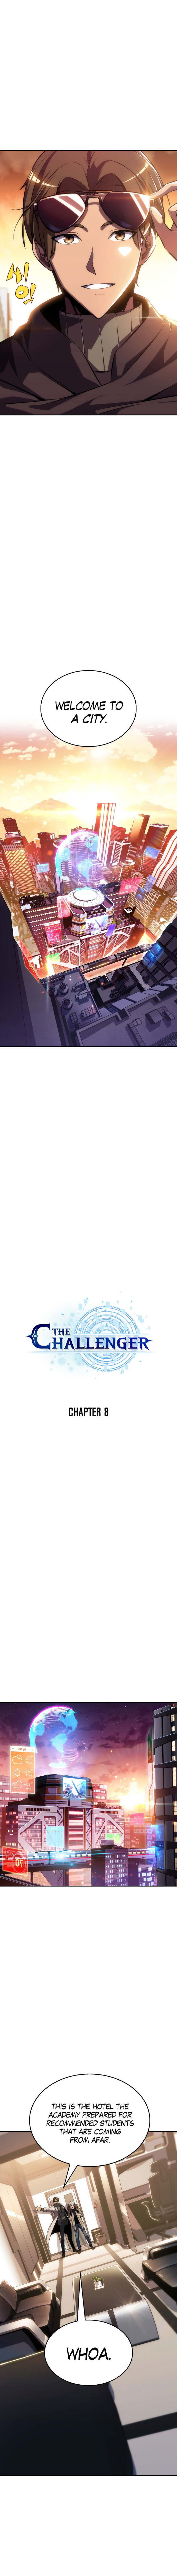 the-challenger-chap-8-2